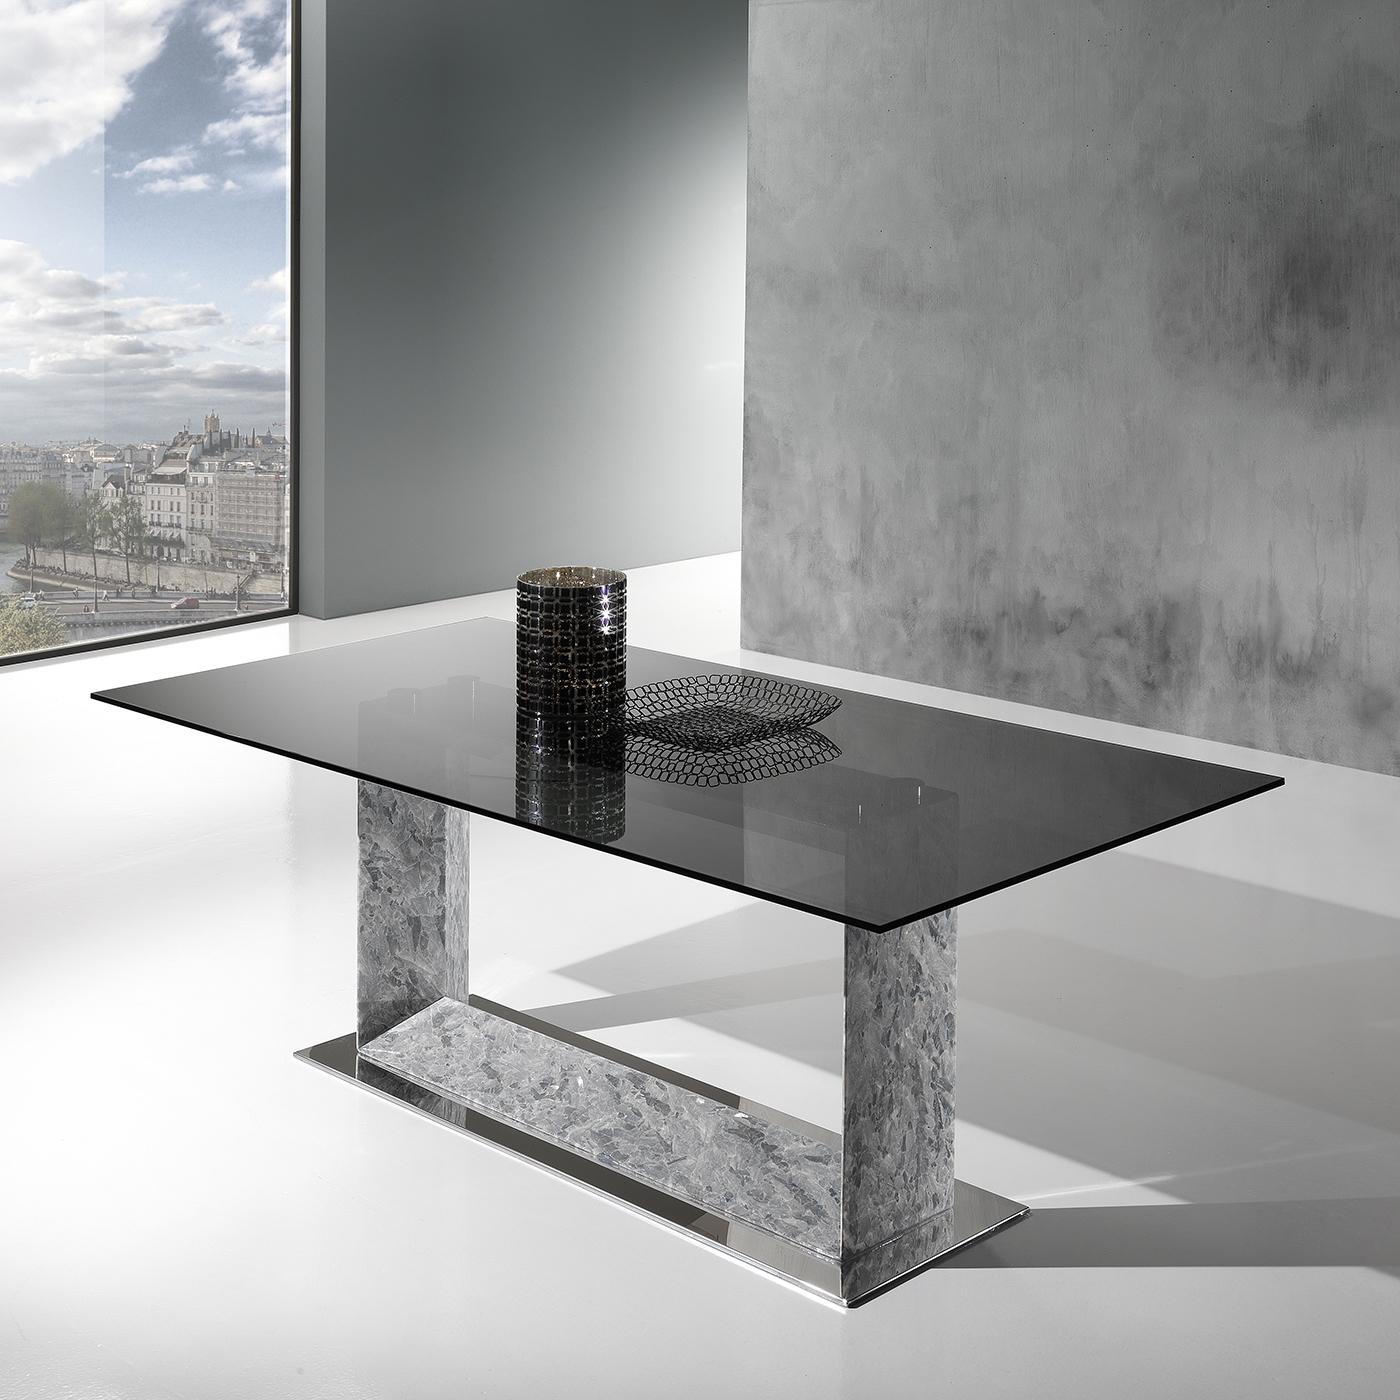 This superb rectangular dining table combines a modern, essential design with traditional, Italian stone-carving artisanship. The U-shaped base - raised on a polished stainless steel rectangular plate - is handcrafted of Crystal Stone®, a rare,